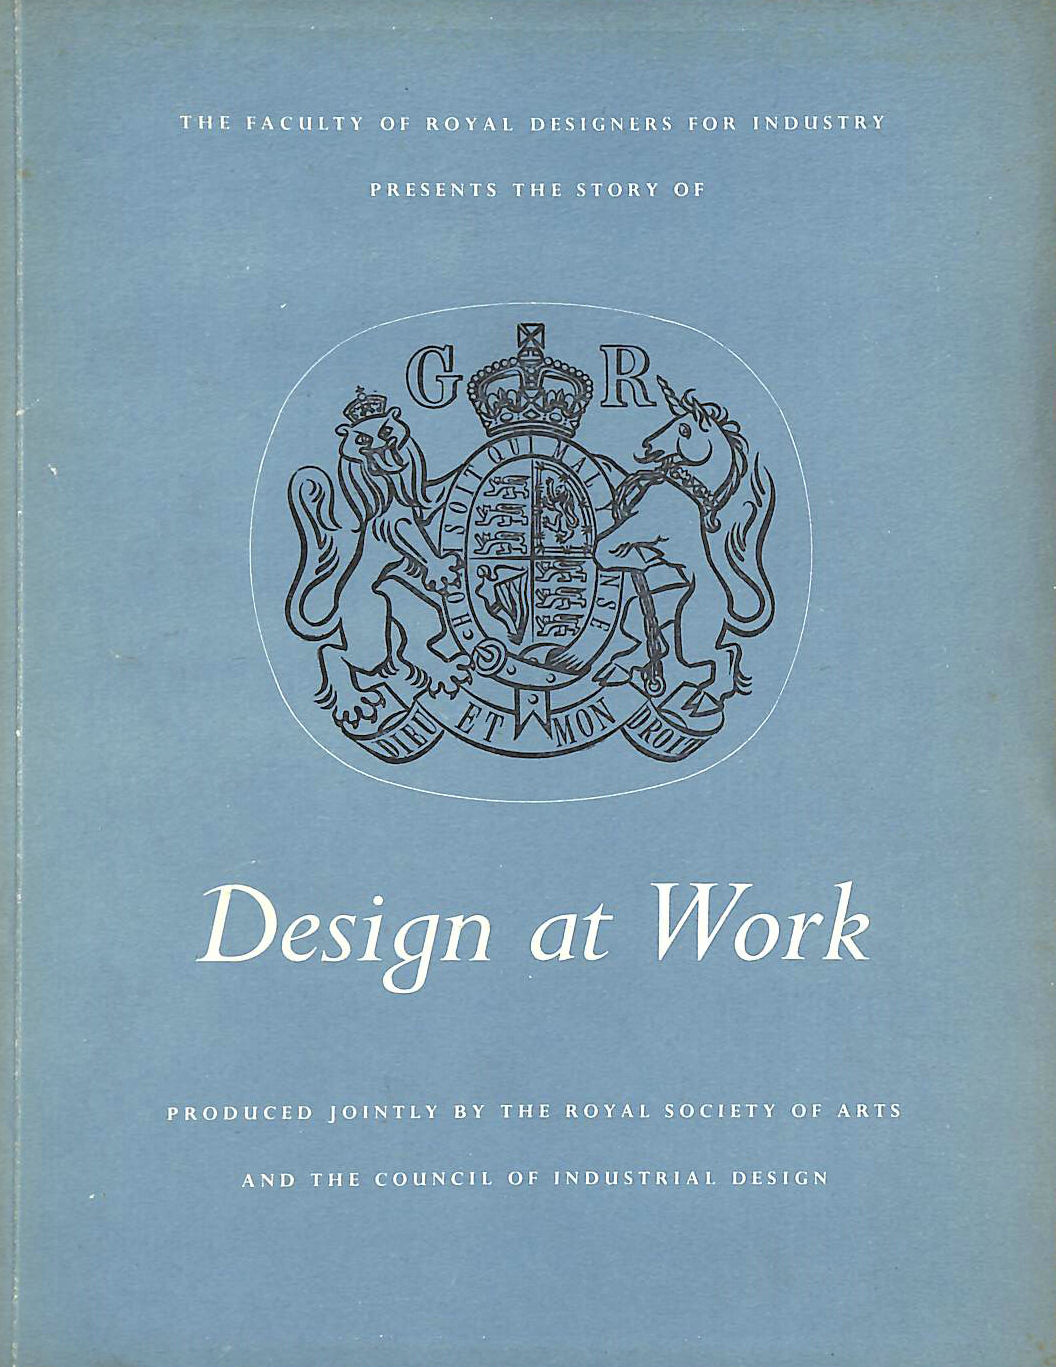 FACULTY OF ROYAL DESIGNERS FOR INDUSTRY LONDON; ENGLAND COUNCIL OF INDUSTRIAL DESIGN; MANUFACTURES AND COMMERCE . ROYAL SOCIETY FOR THE ENCOURAGEMENT OF ARTS LONDON - Design at Work. Produced jointly by the Royal Society of Arts and the Council of Industrial Design. With illustrations